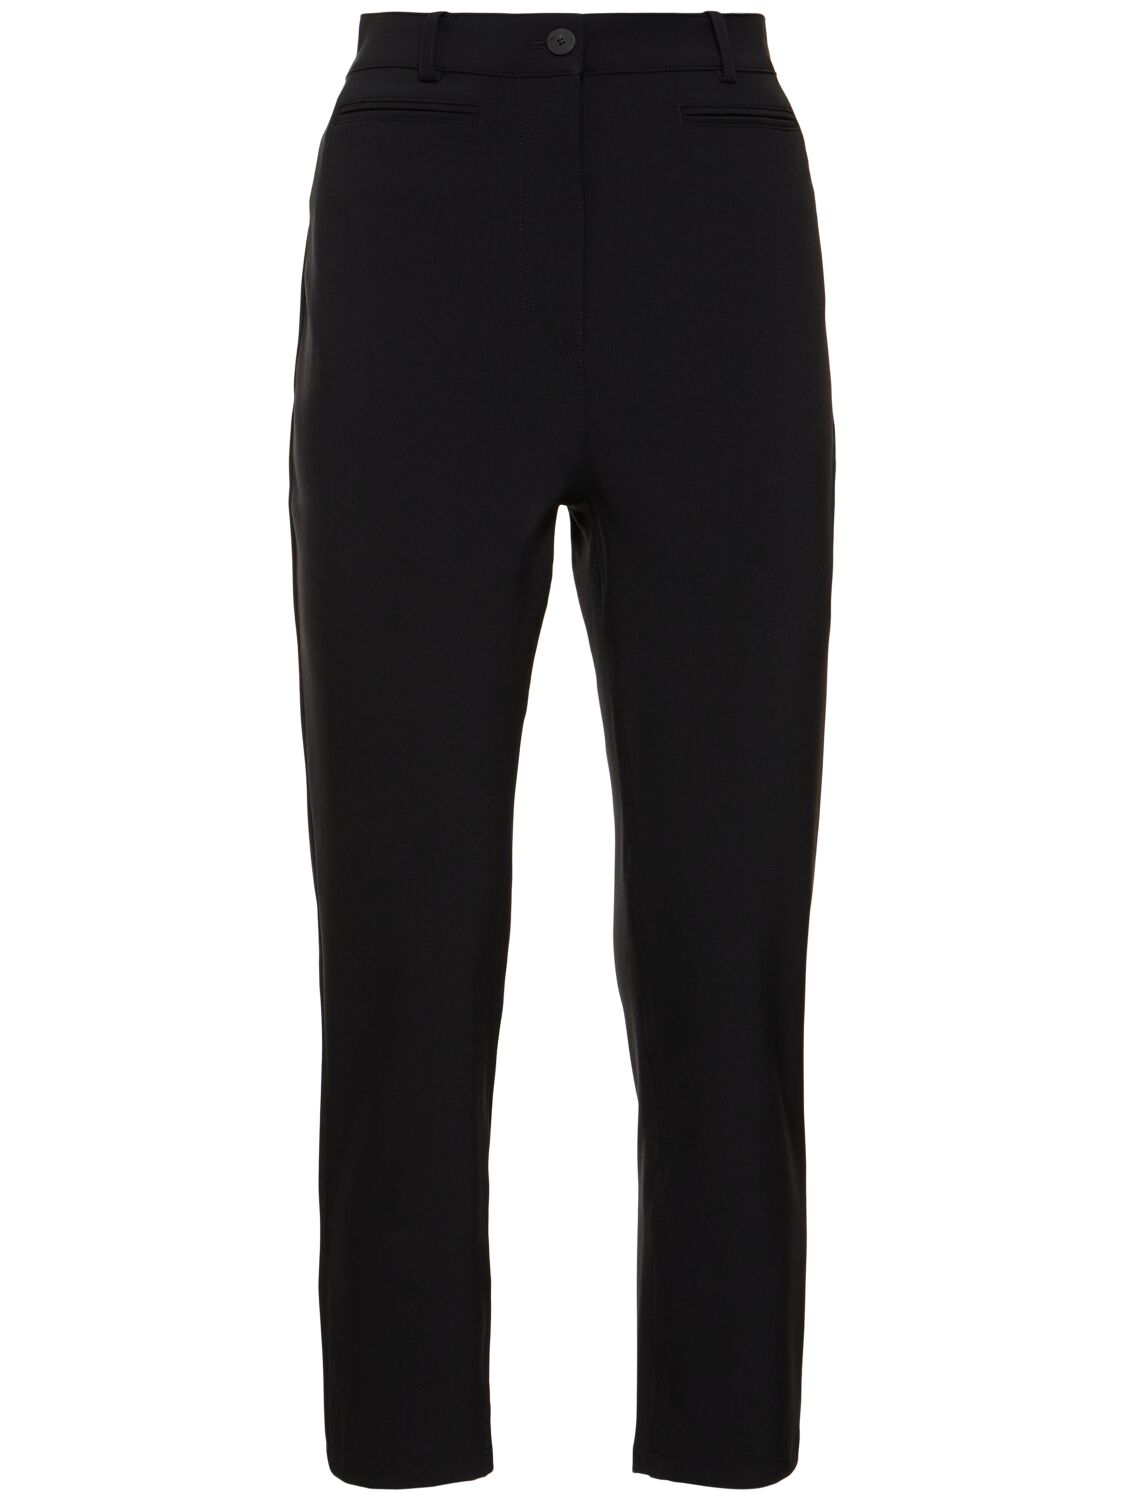 Image of Compact Stretch Nylon Twill Crop Pants